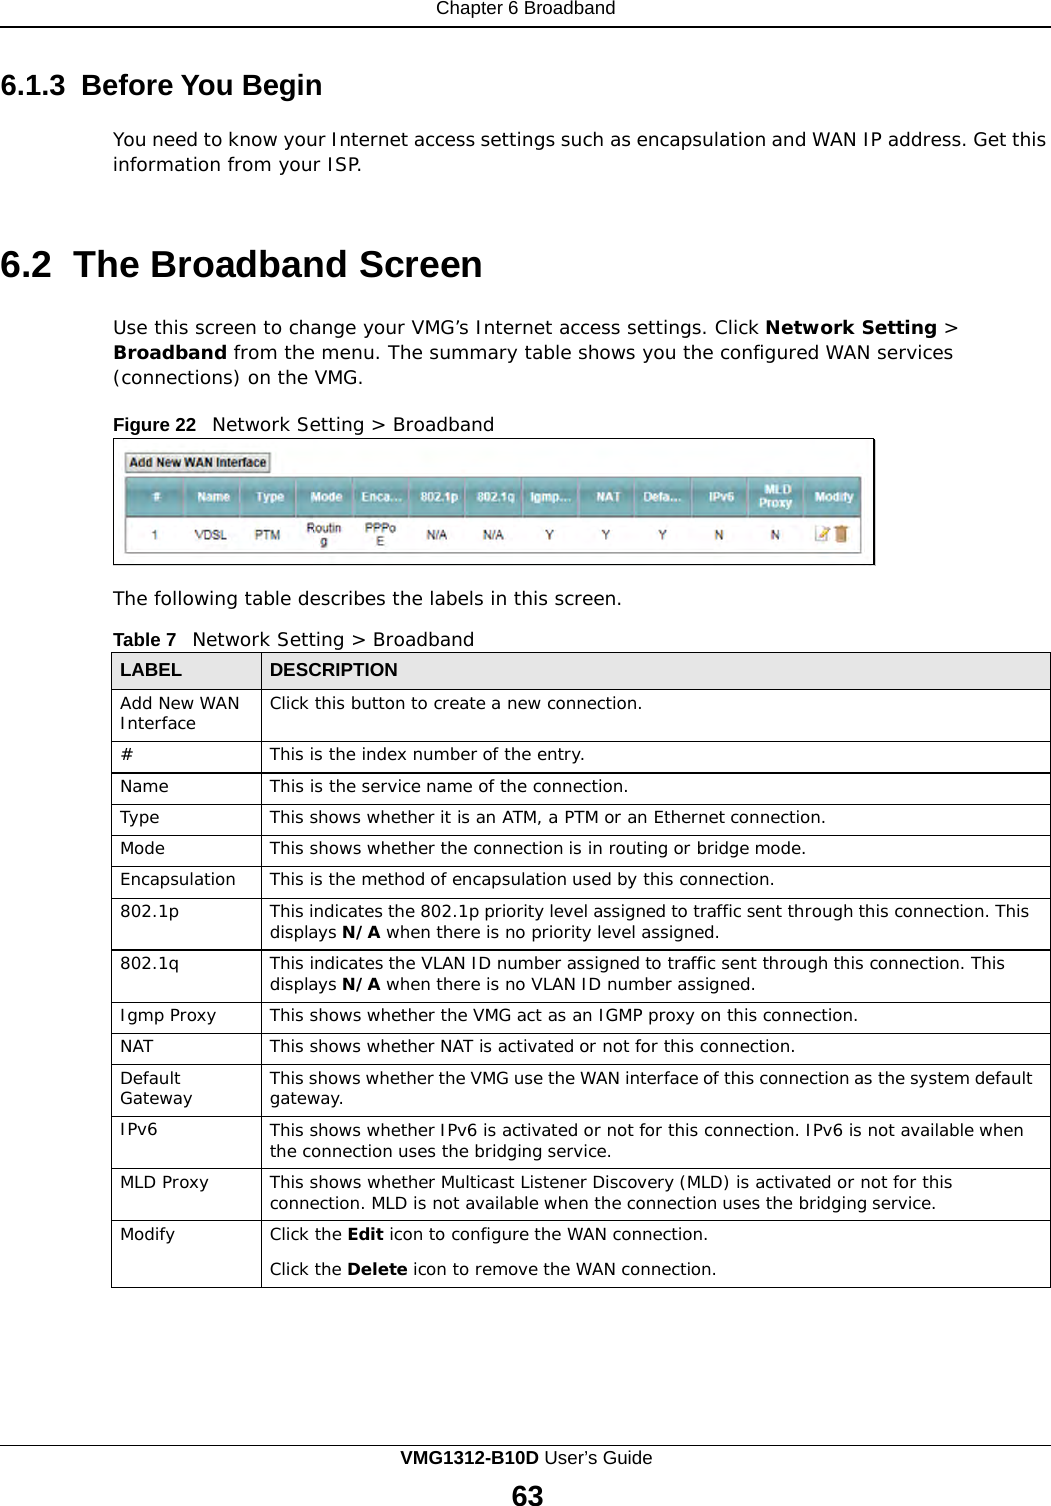 Chapter 6 Broadband      6.1.3  Before You Begin  You need to know your Internet access settings such as encapsulation and WAN IP address. Get this information from your ISP.    6.2 The Broadband Screen  Use this screen to change your VMG’s Internet access settings. Click Network Setting &gt; Broadband from the menu. The summary table shows you the configured WAN services (connections) on the VMG.  Figure 22   Network Setting &gt; Broadband        The following table describes the labels in this screen.  Table 7   Network Setting &gt; Broadband  LABEL DESCRIPTION Add New WAN Interface Click this button to create a new connection. # This is the index number of the entry. Name This is the service name of the connection. Type This shows whether it is an ATM, a PTM or an Ethernet connection. Mode This shows whether the connection is in routing or bridge mode. Encapsulation This is the method of encapsulation used by this connection. 802.1p This indicates the 802.1p priority level assigned to traffic sent through this connection. This displays N/A when there is no priority level assigned. 802.1q This indicates the VLAN ID number assigned to traffic sent through this connection. This displays N/A when there is no VLAN ID number assigned. Igmp Proxy This shows whether the VMG act as an IGMP proxy on this connection. NAT This shows whether NAT is activated or not for this connection. Default Gateway This shows whether the VMG use the WAN interface of this connection as the system default gateway. IPv6 This shows whether IPv6 is activated or not for this connection. IPv6 is not available when the connection uses the bridging service. MLD Proxy This shows whether Multicast Listener Discovery (MLD) is activated or not for this connection. MLD is not available when the connection uses the bridging service. Modify Click the Edit icon to configure the WAN connection.  Click the Delete icon to remove the WAN connection. VMG1312-B10D User’s Guide 63  